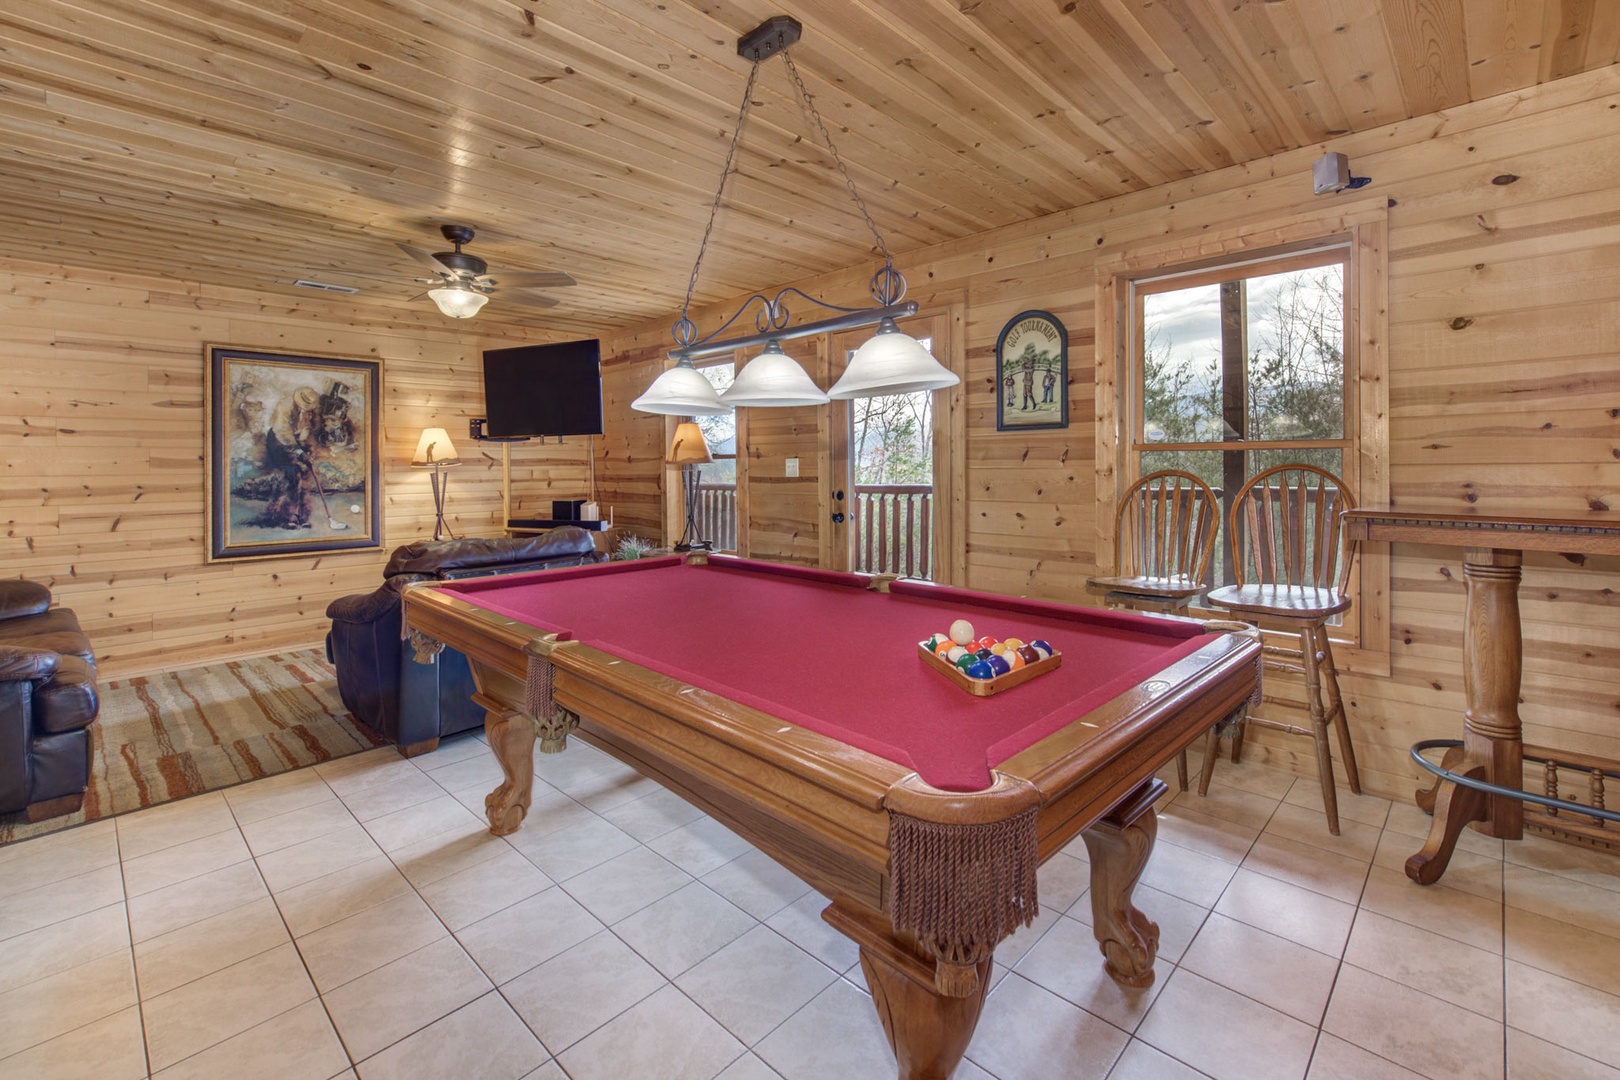 The game room retreat features a pool table, air hockey, sleeper sofa, & TV